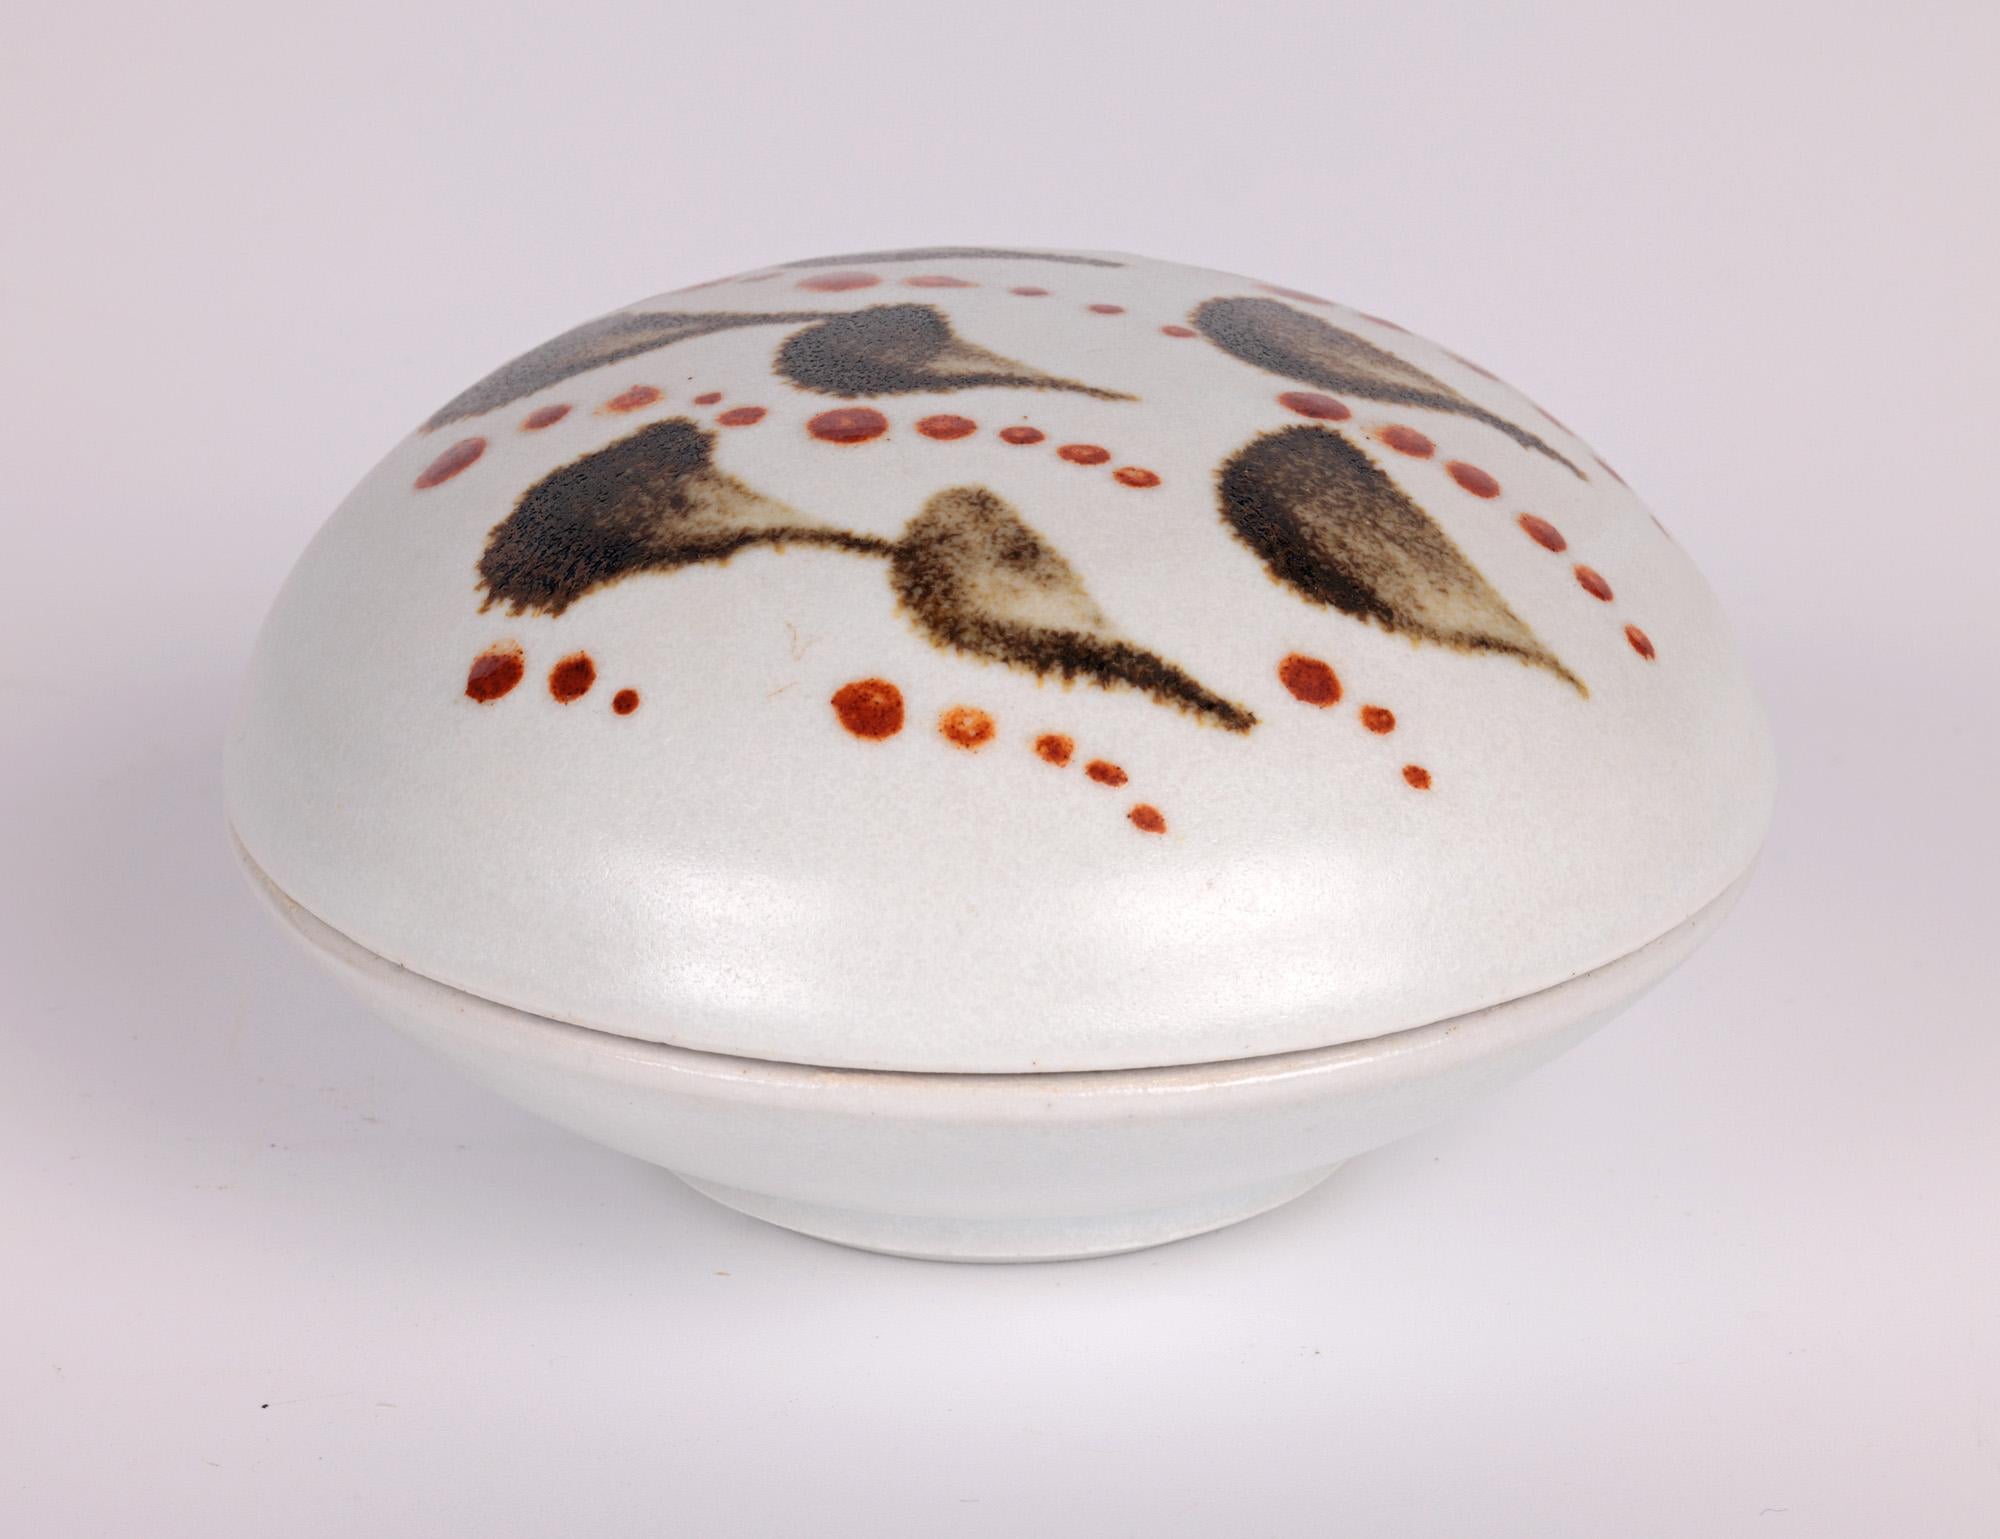 Amanda Brier Leach Pottery Porcelain Lidded Box with Stylized Leaf Patterning  In Good Condition For Sale In Bishop's Stortford, Hertfordshire